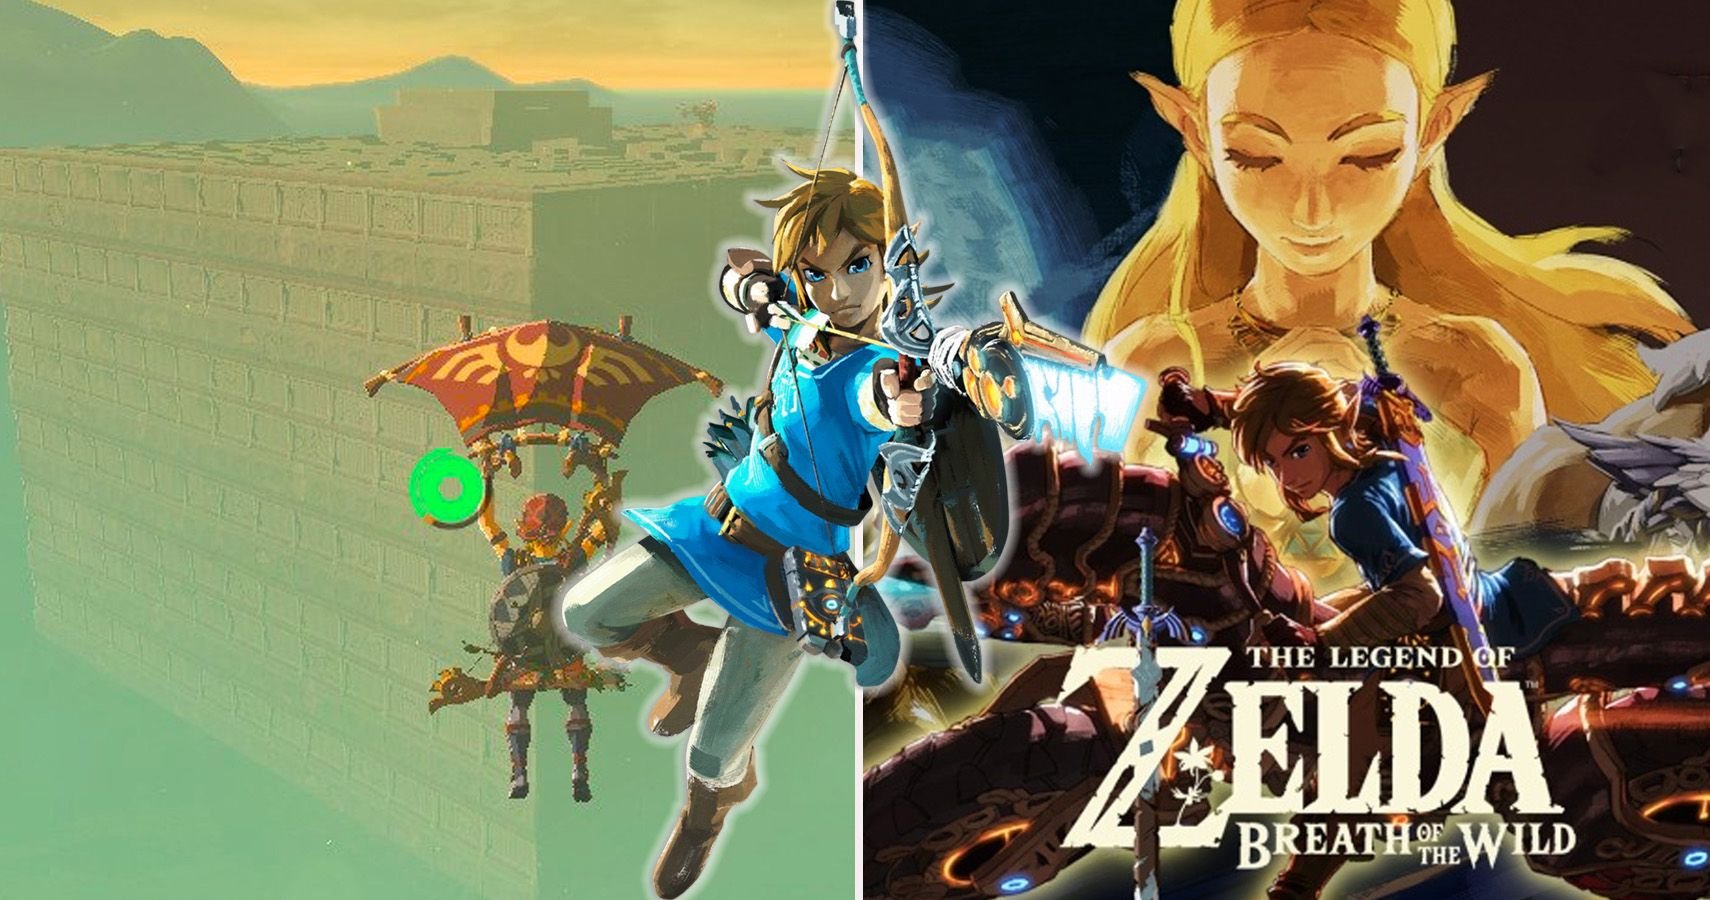 Zelda: 15 Things To Do After Beating The Main Story In Breath Of The Wild